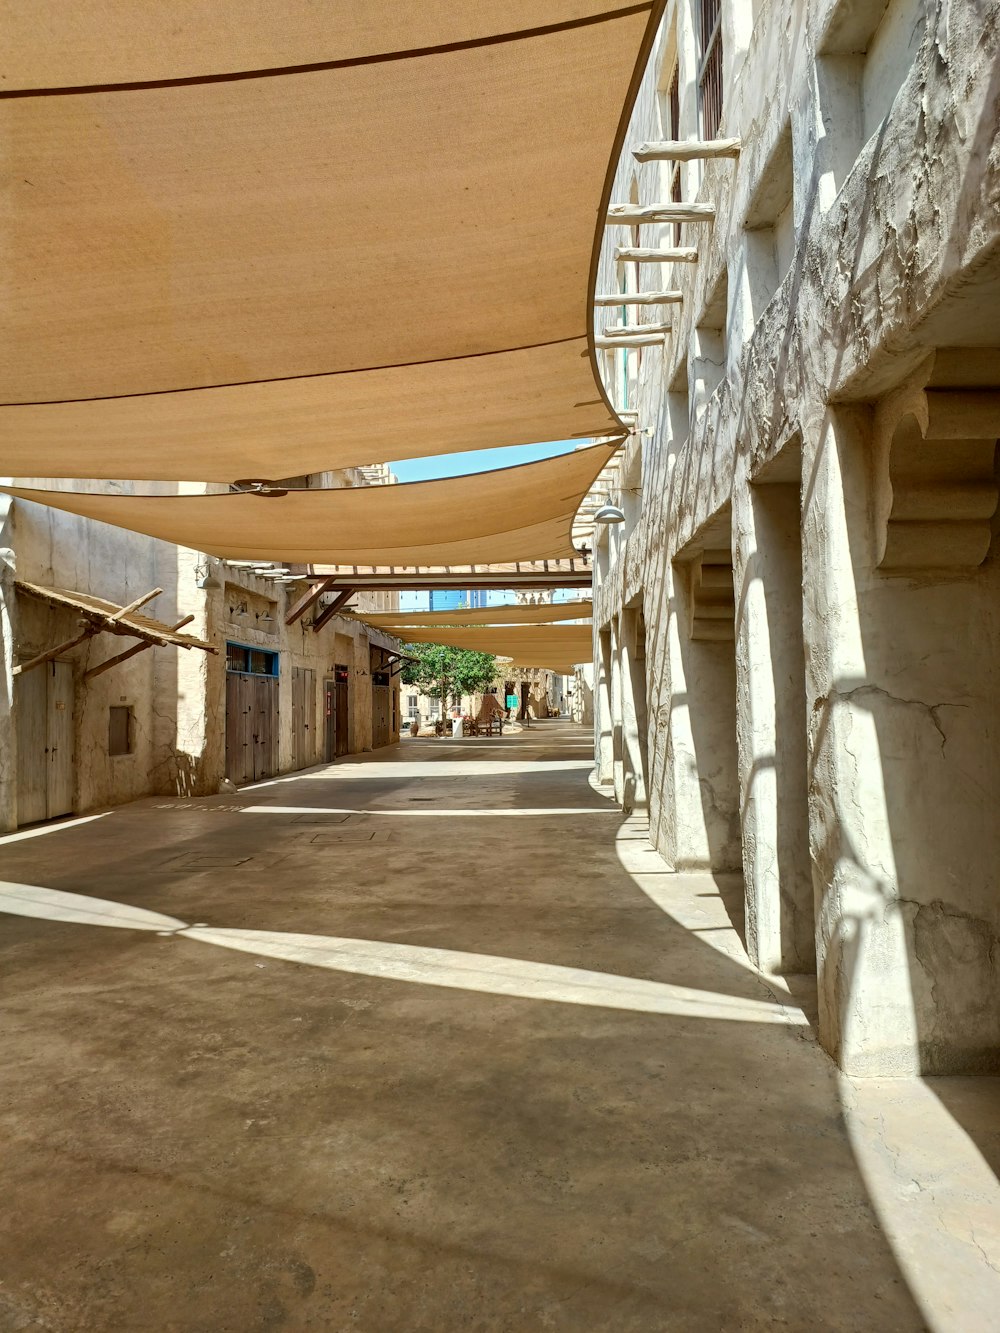 a street lined with buildings and covered in shade